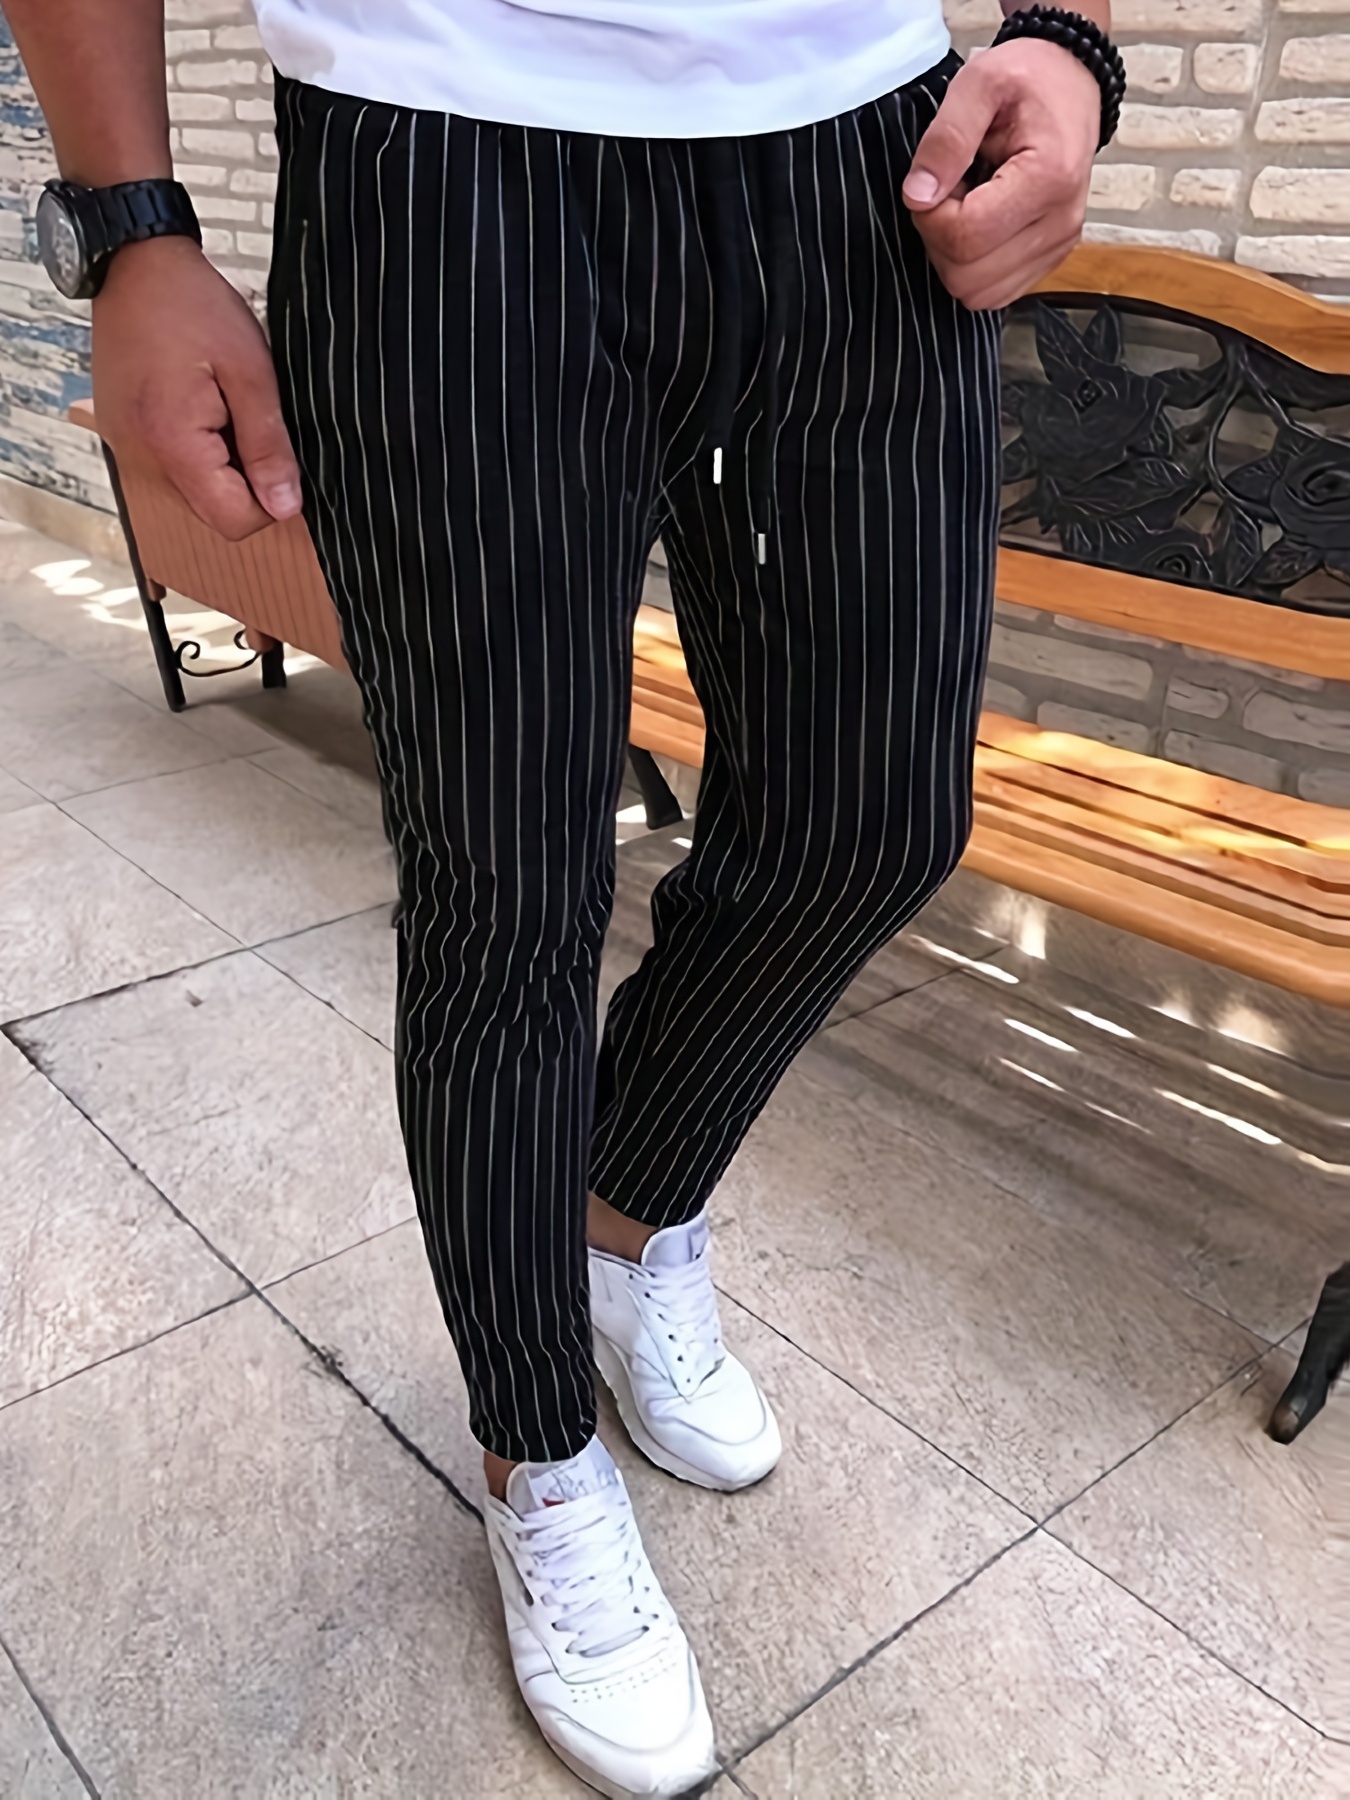 Black and White Vertical Striped Pants Mens, Vintage Vertical Striped  Trouser Pants Mens for Sale